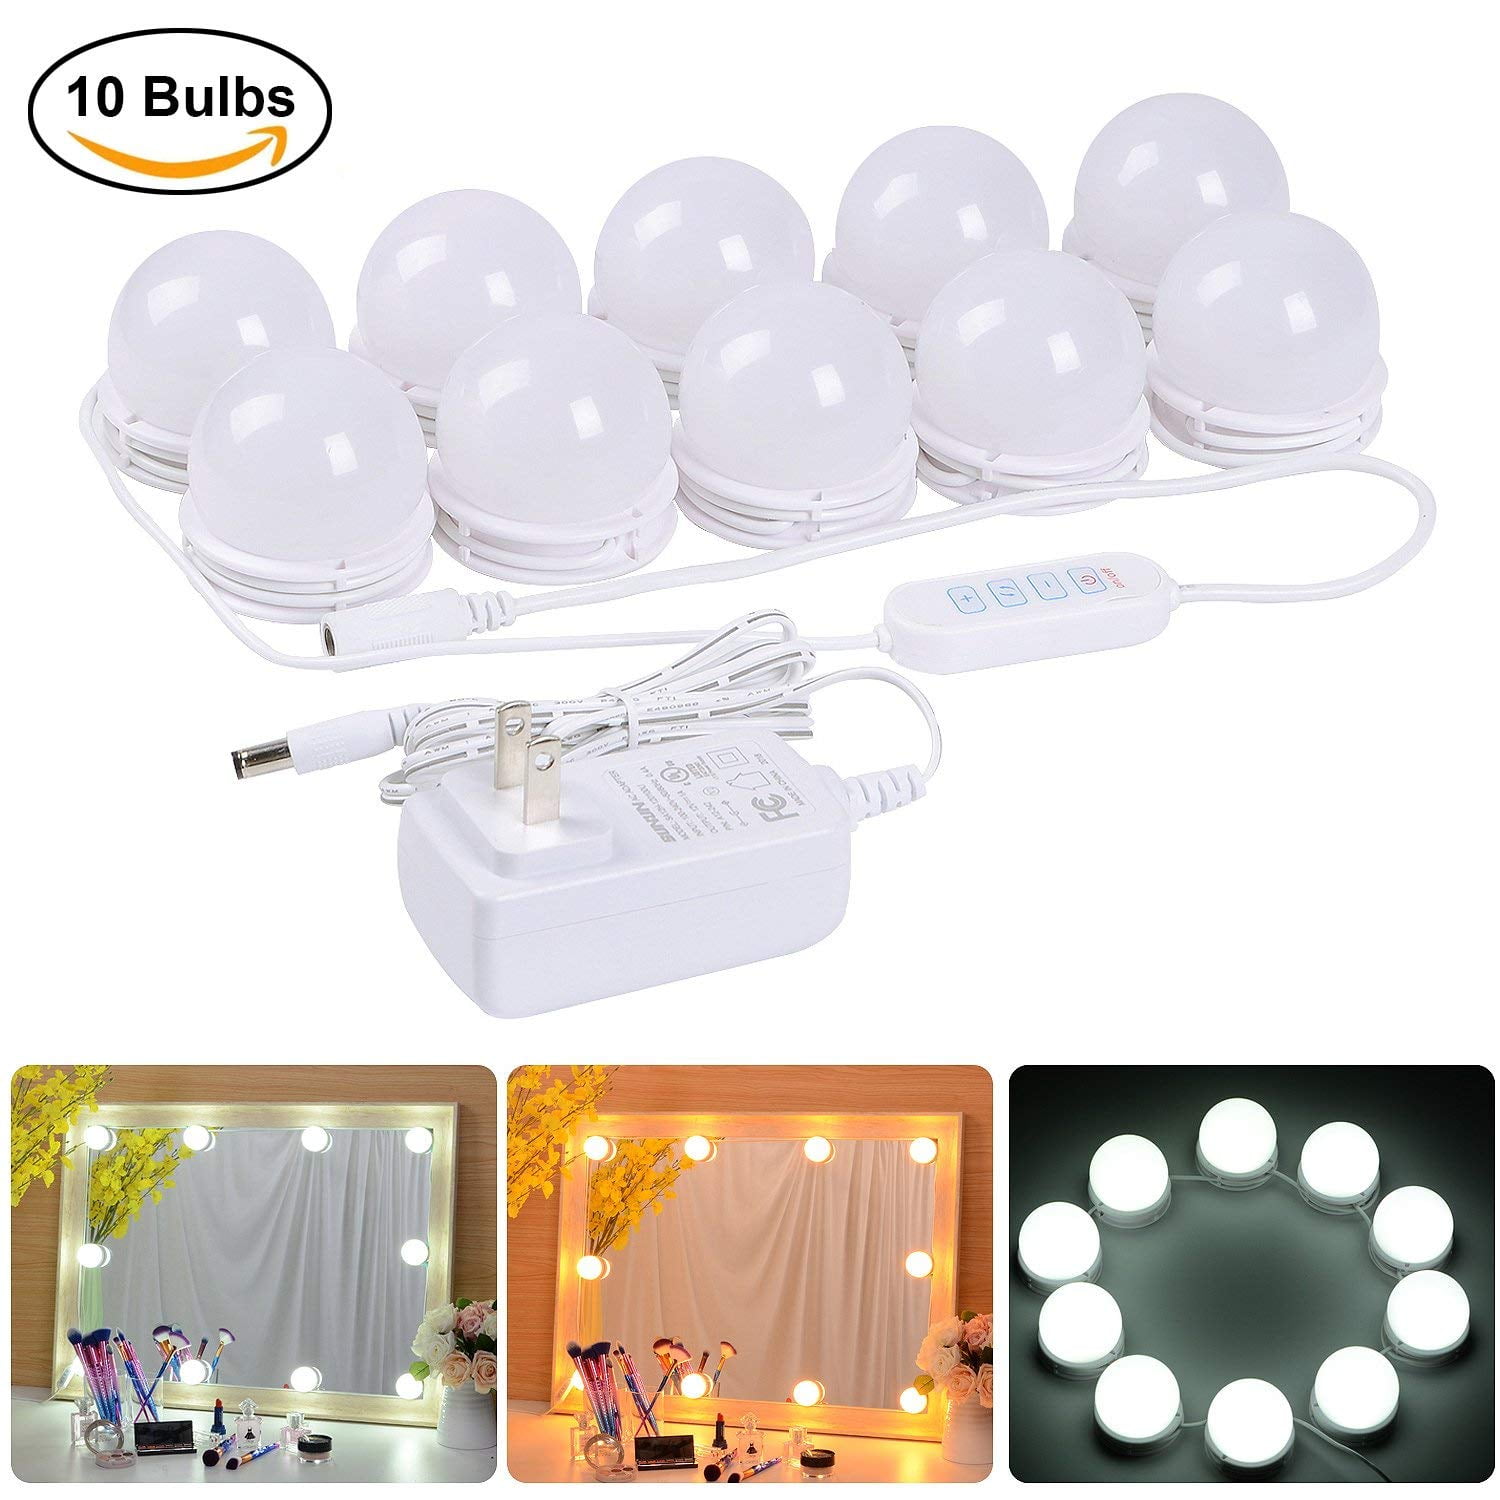 3 Colors & 10 Brightness Hollywood Style 10 Dimmable Light Bulbs for Makeup Vanity BASEIN LED Vanity Mirror Lights Kit 